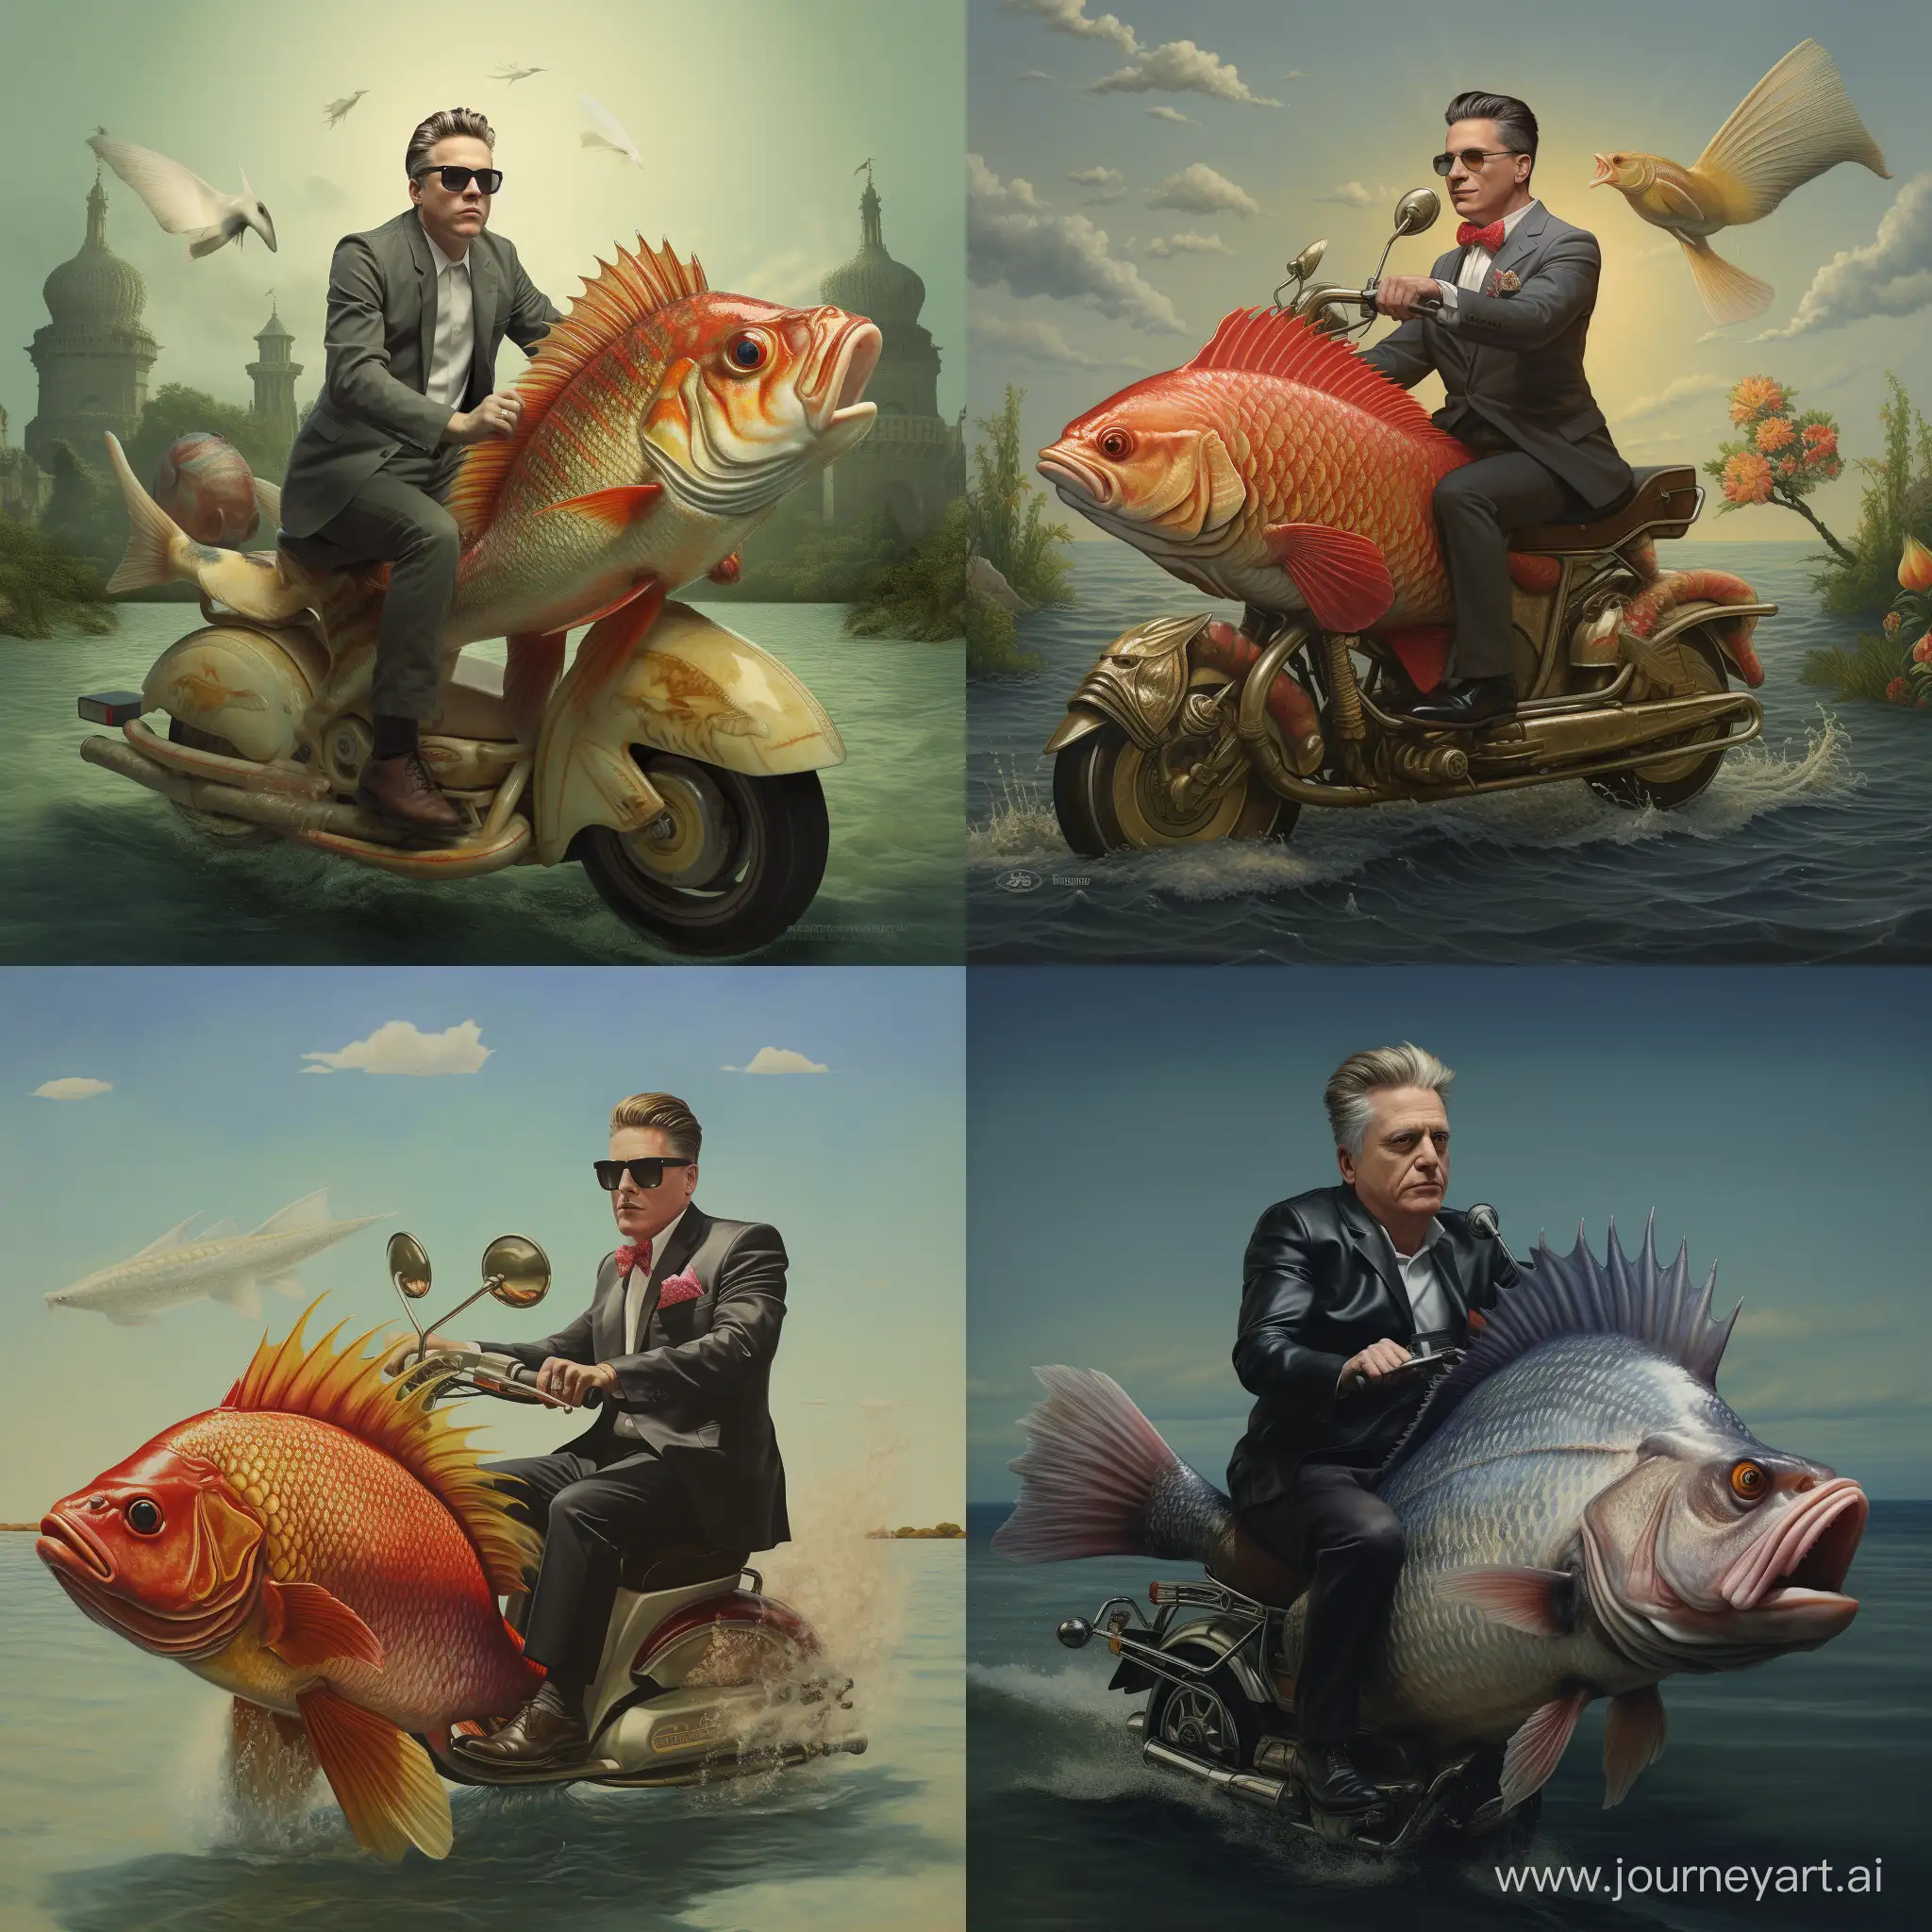 H-P-Baxxter-Riding-a-Scooter-with-a-Gigantic-Fish